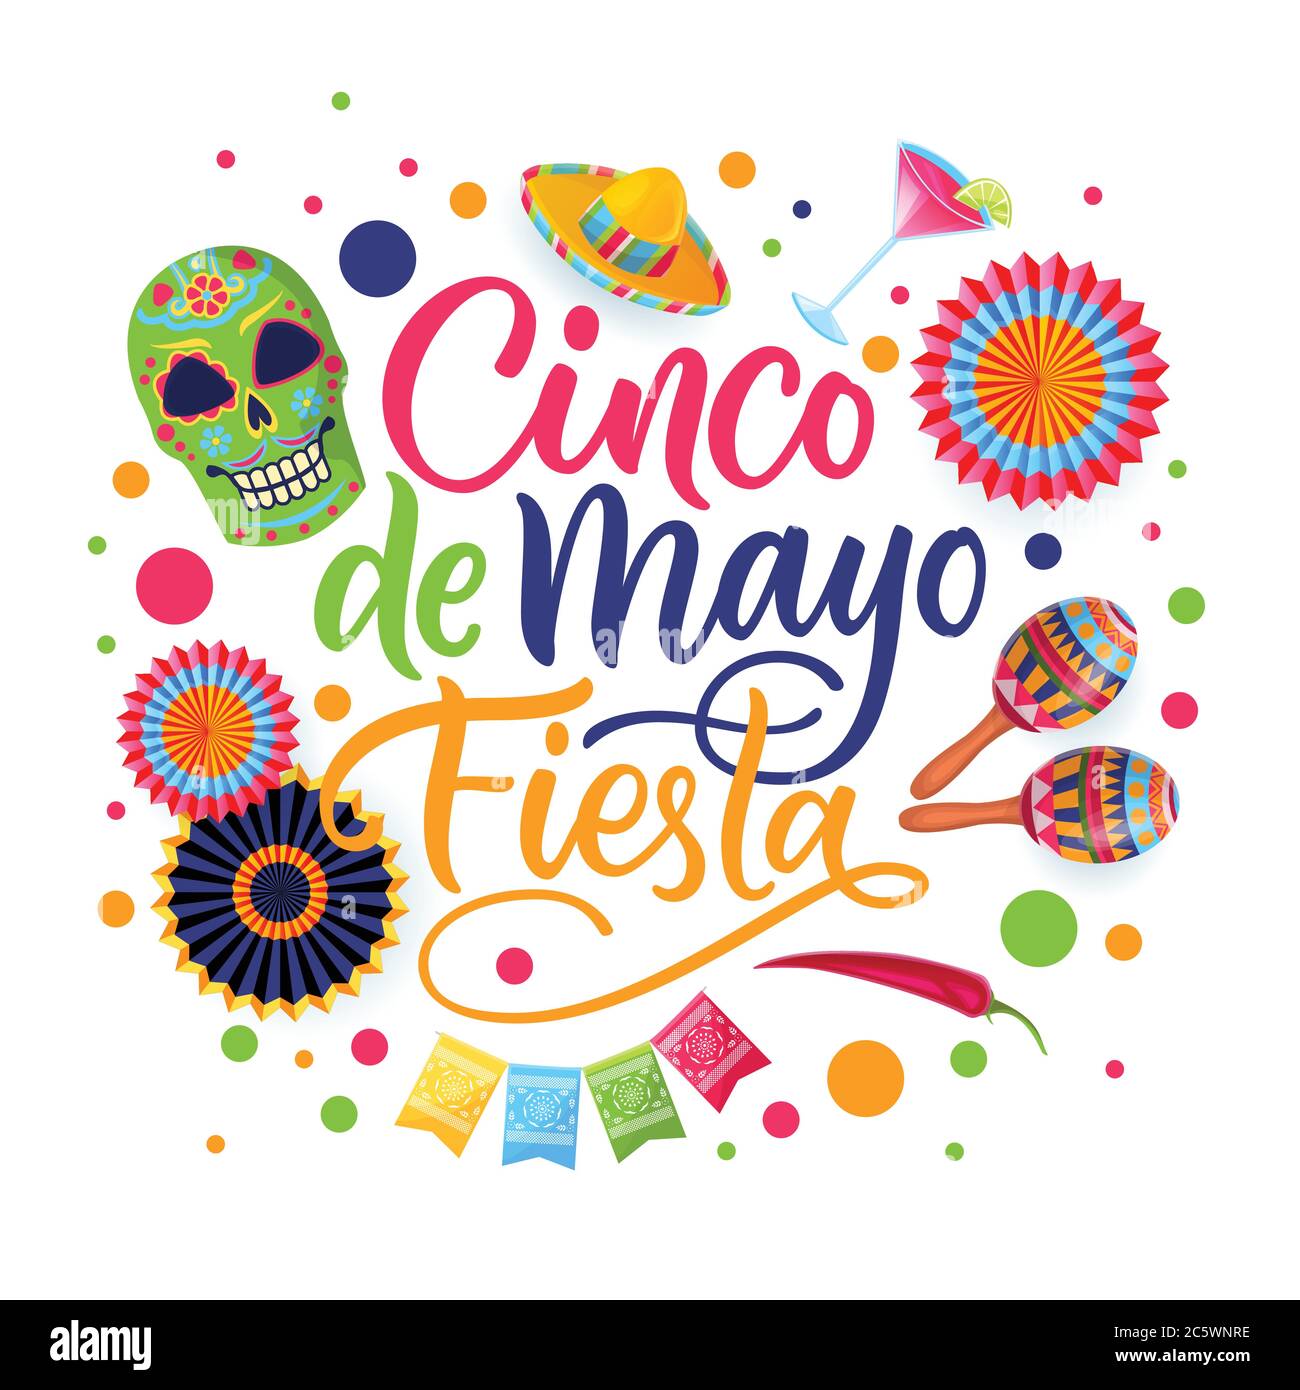 Cinco de Mayo Fiesta hand drawn calligraphy lettering and Mexican national symbols, isolated on white background. Greeting gift card, banner or poster Stock Vector